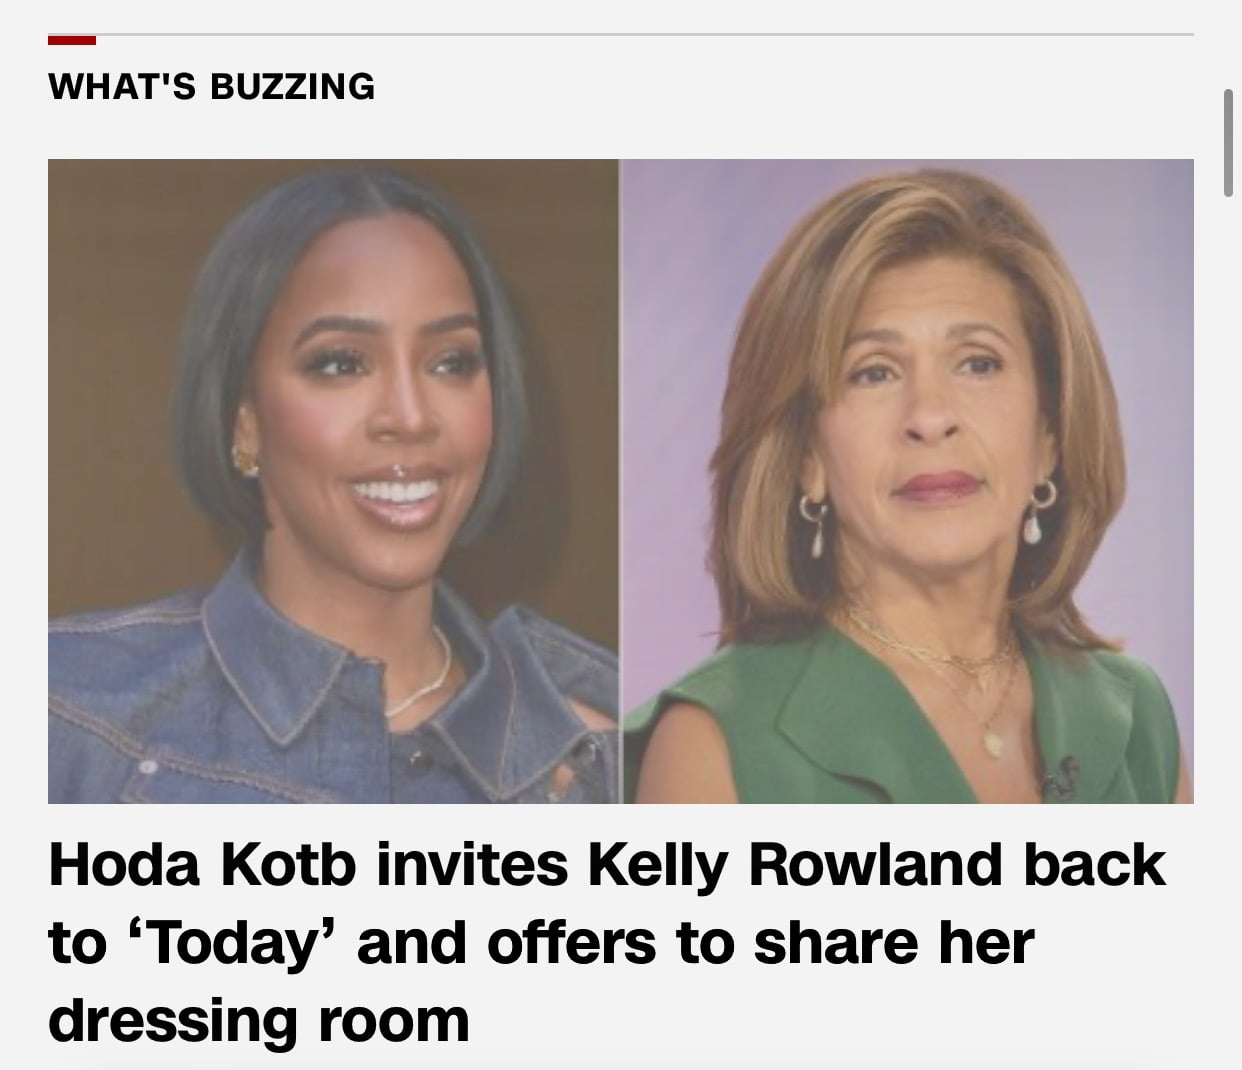 ‘We Stand with You’: Vice President Harris and White House Comment on the Death of the Owasso Non-binary Aggressor, Allegedly While Hoda Kotb Invites Kelly Rowland Back to ‘Today’ and Offers To Share Her Dressing Room